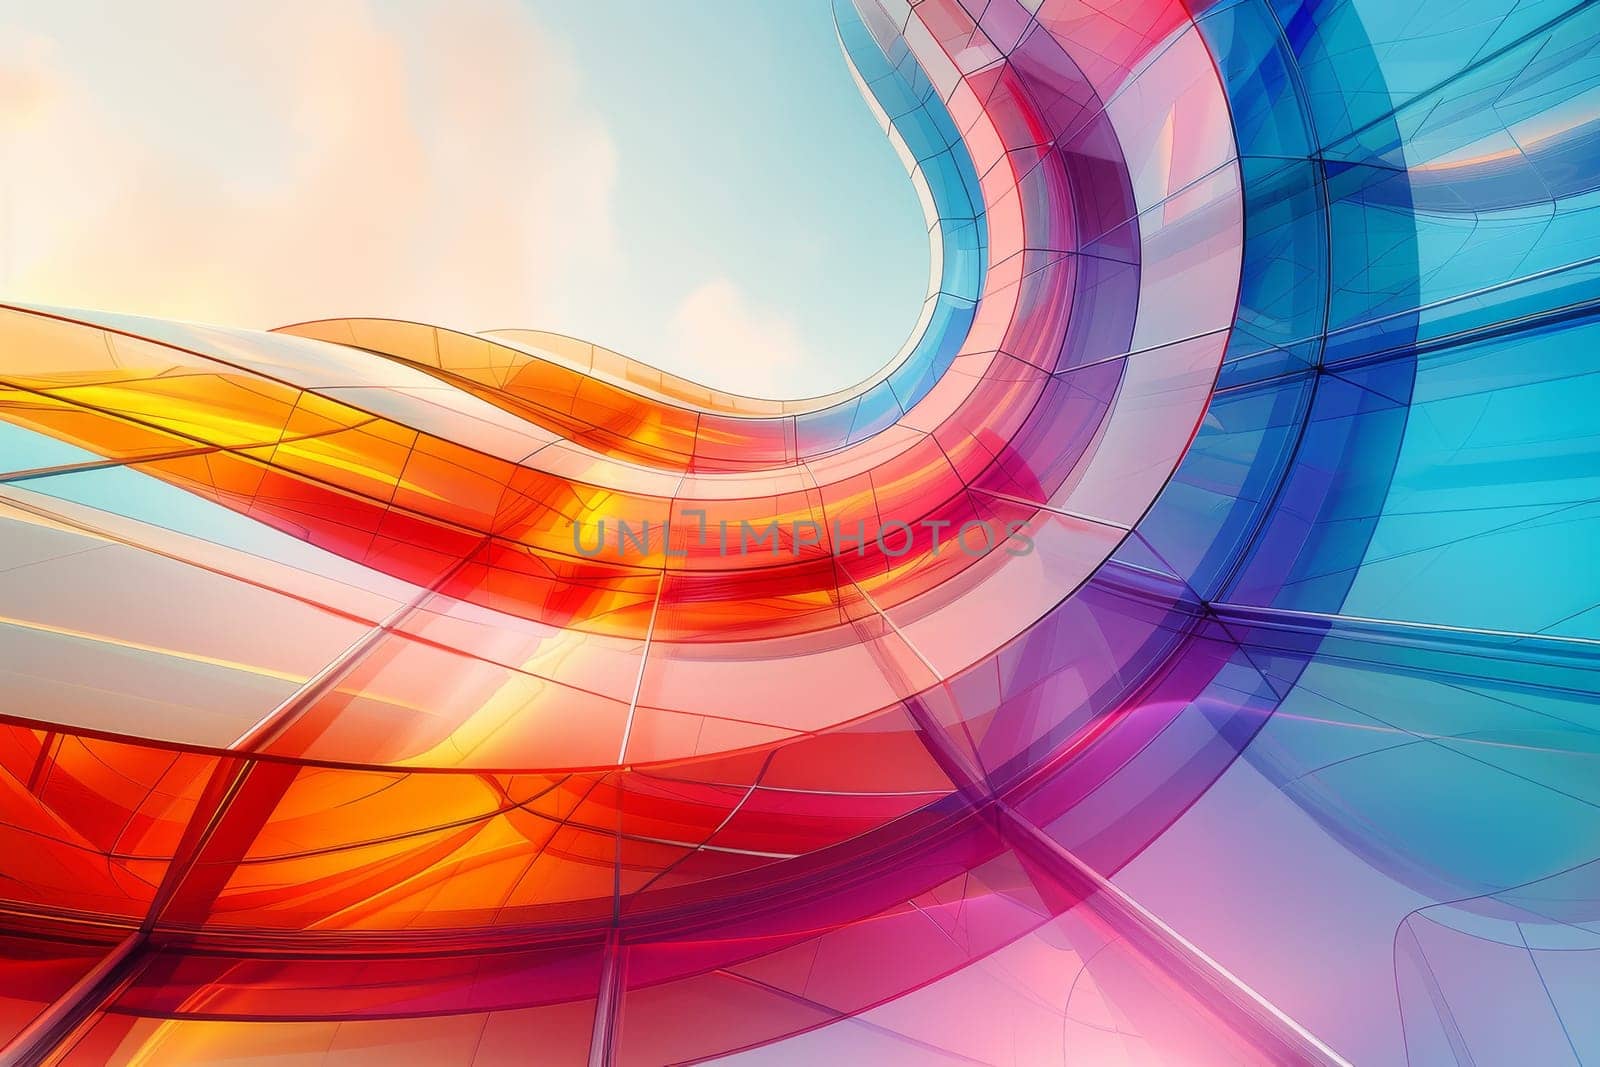 A colorful, abstract design with a red, yellow, and blue swirl. The colors are vibrant and the design is dynamic.